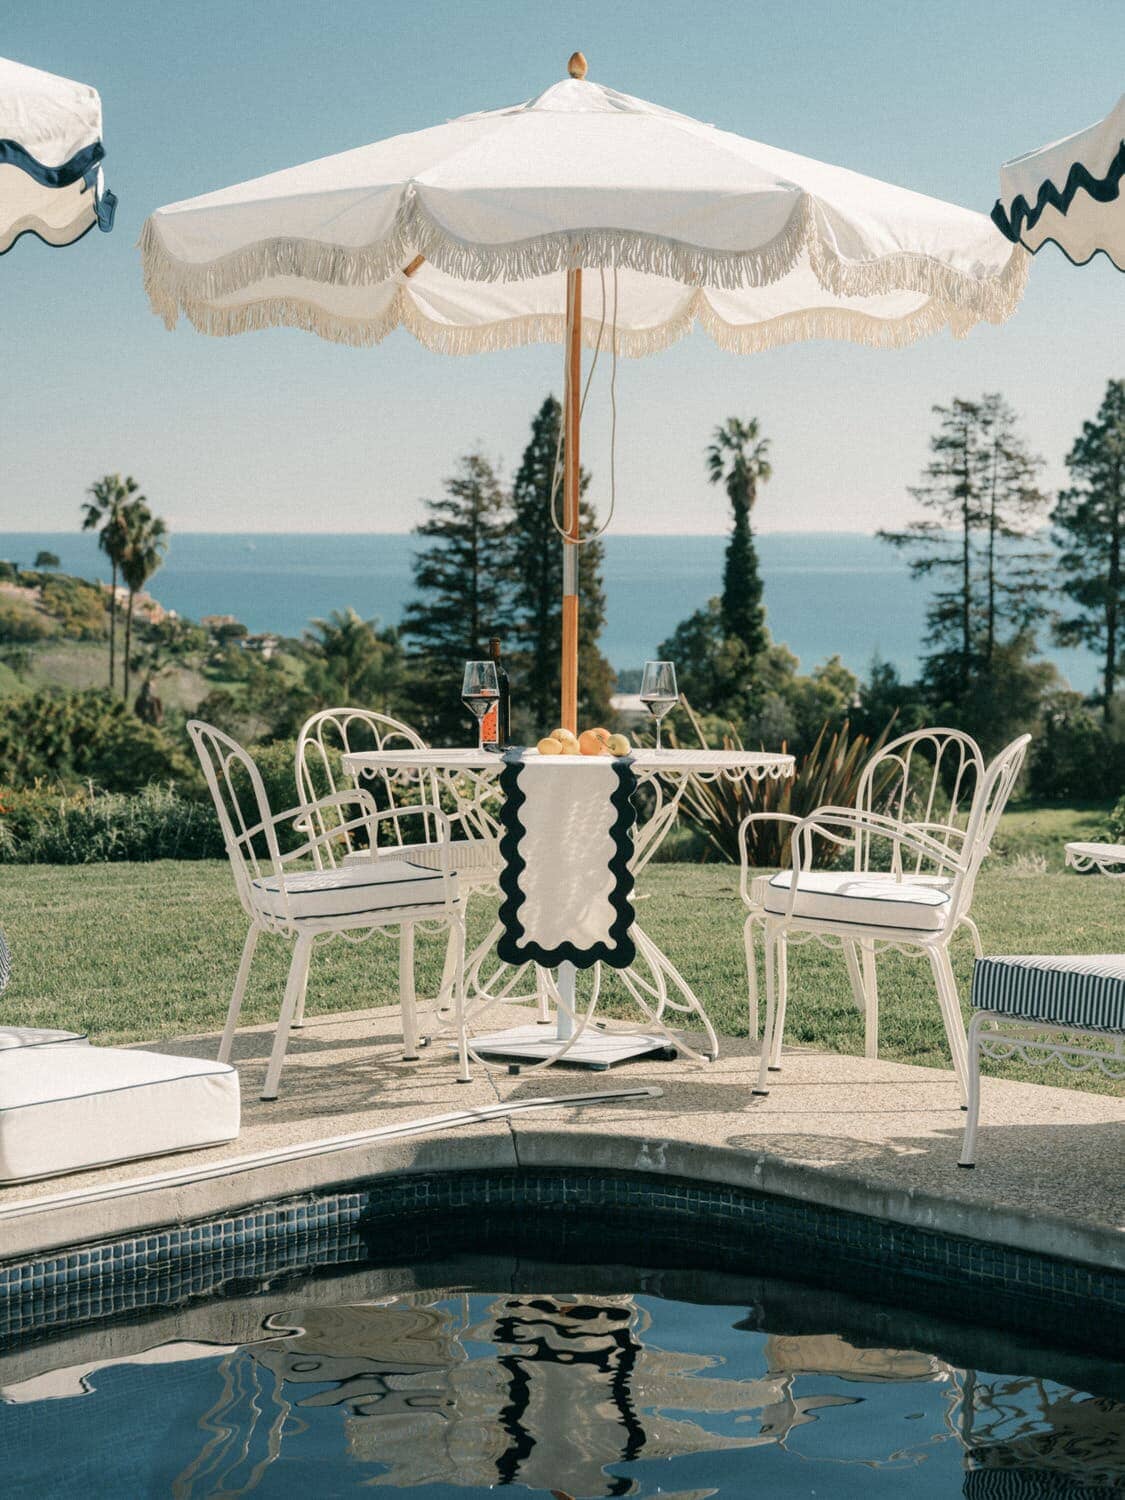 White table, chairs and umbrella next to a pool